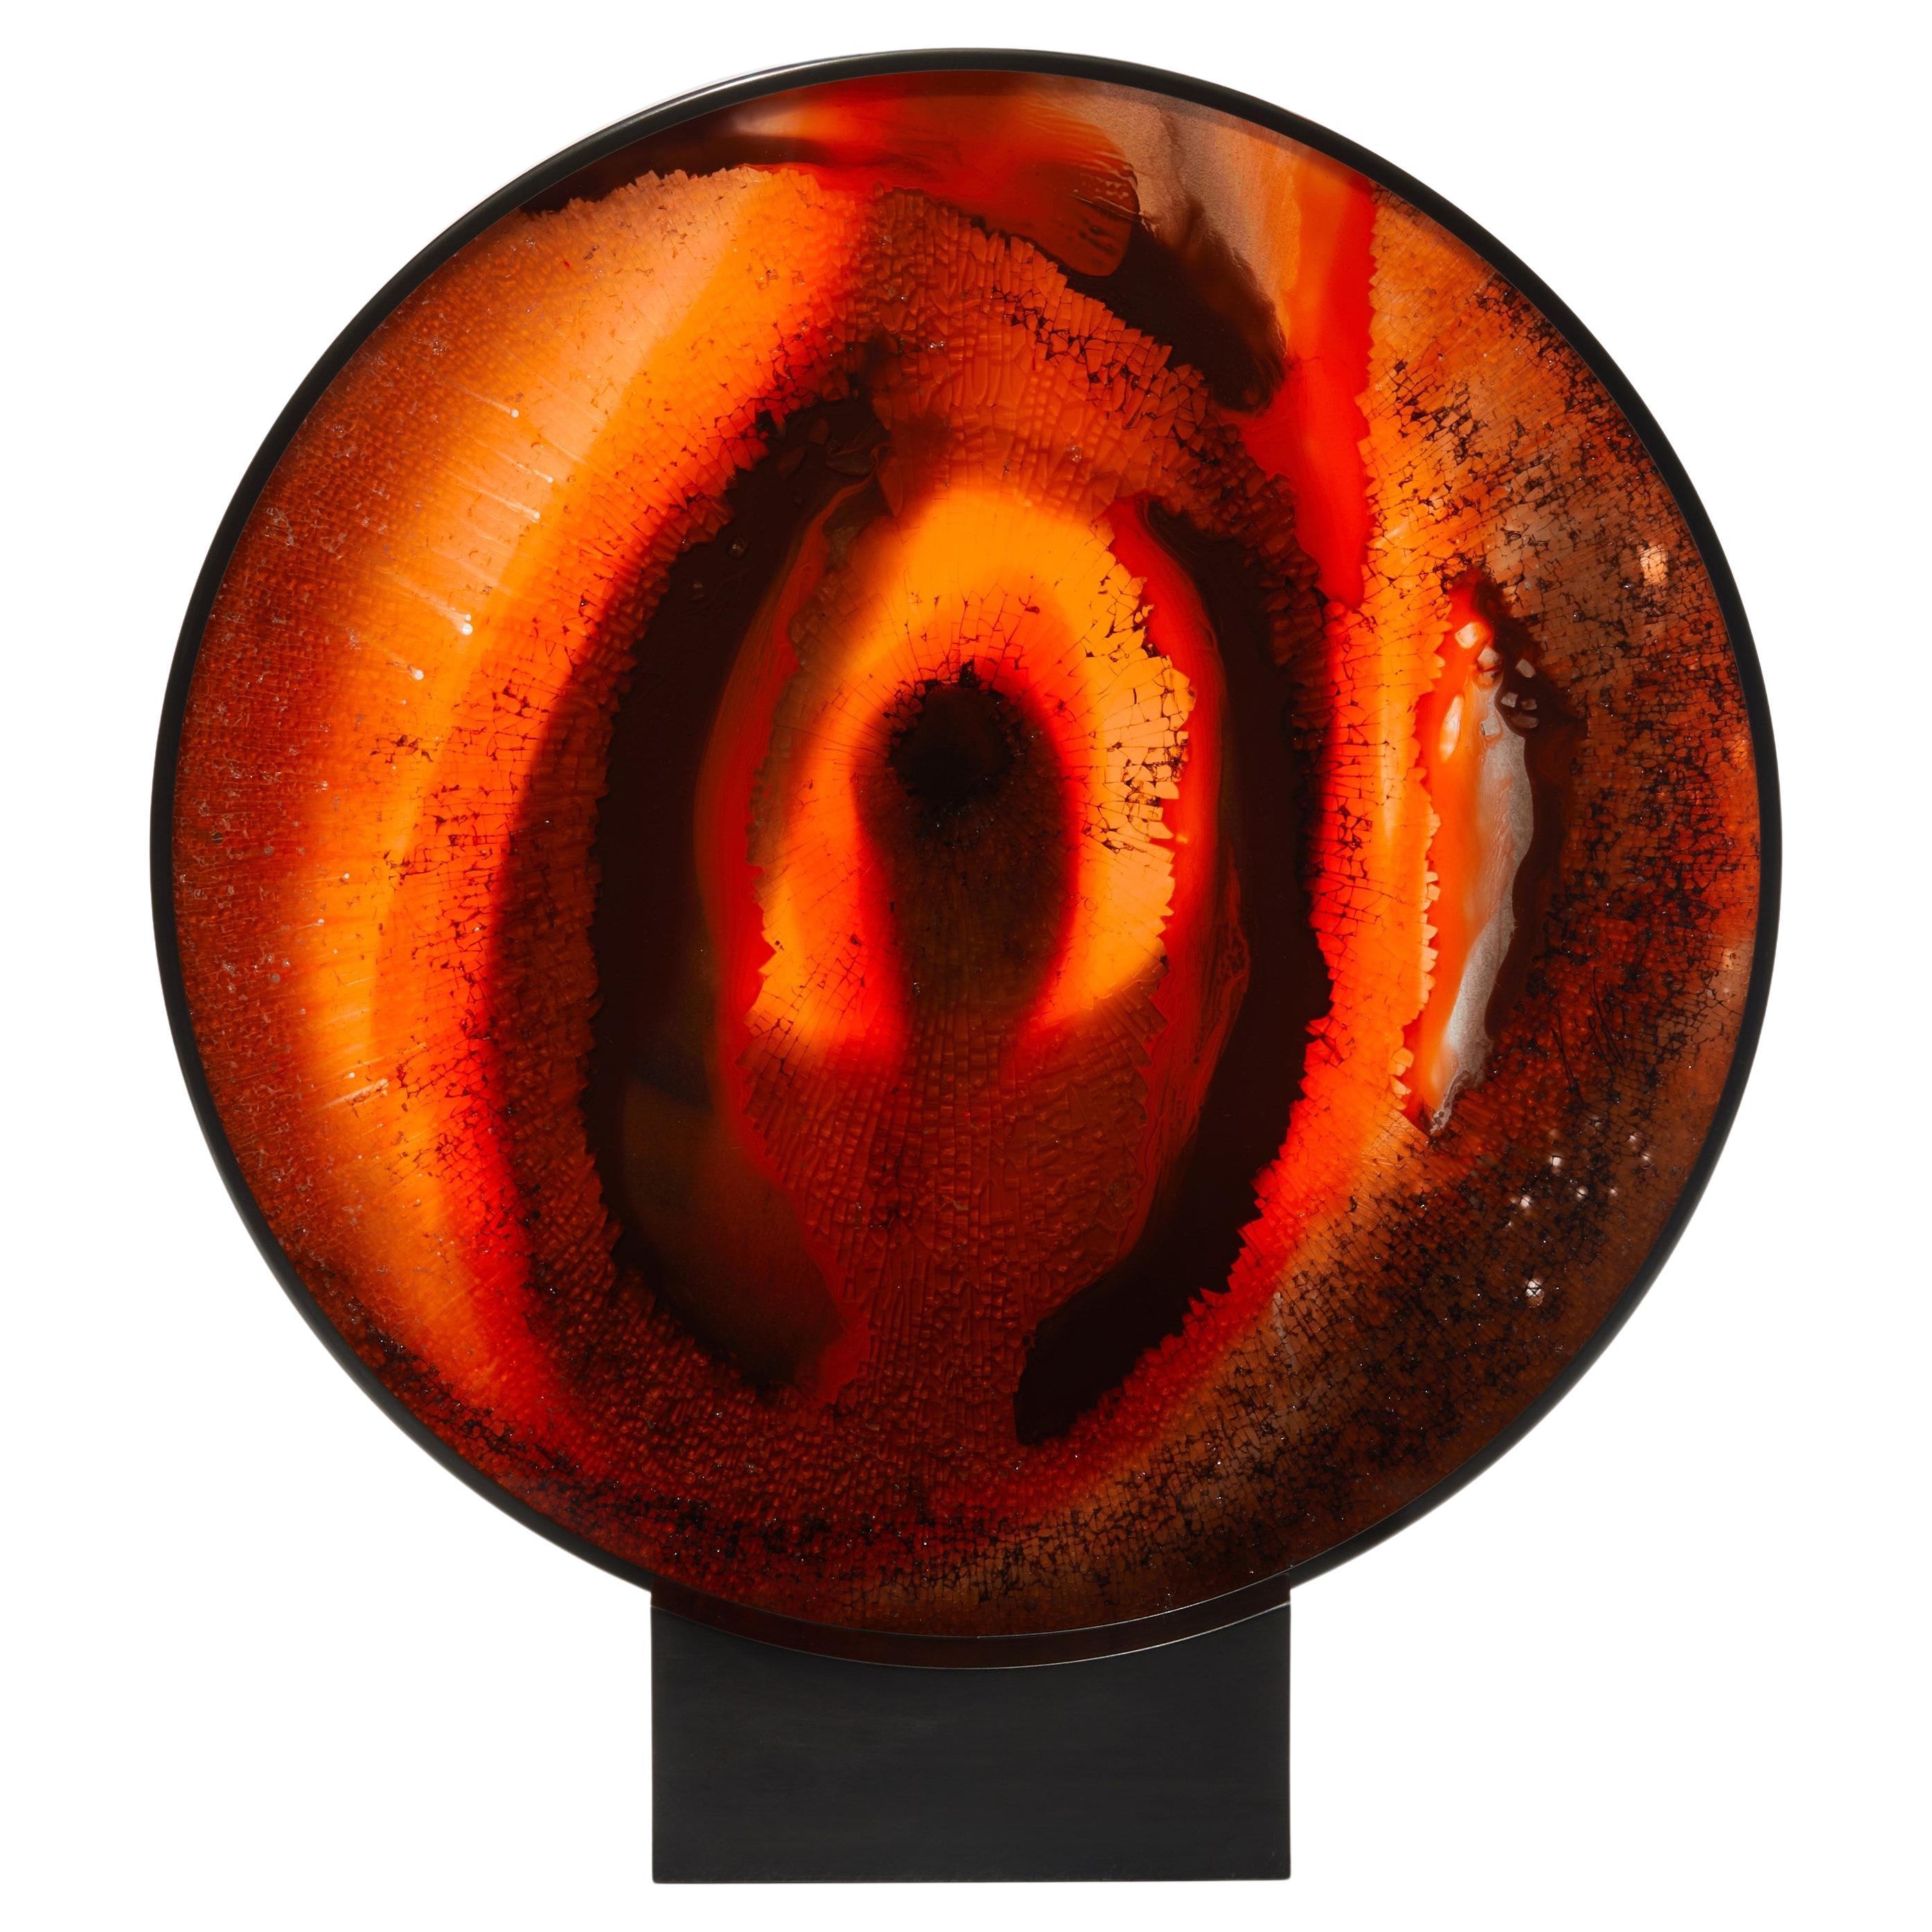 Eye of Bravery, a Red & Black Abstract Glass Artwork by Yorgos Papadopoulos For Sale